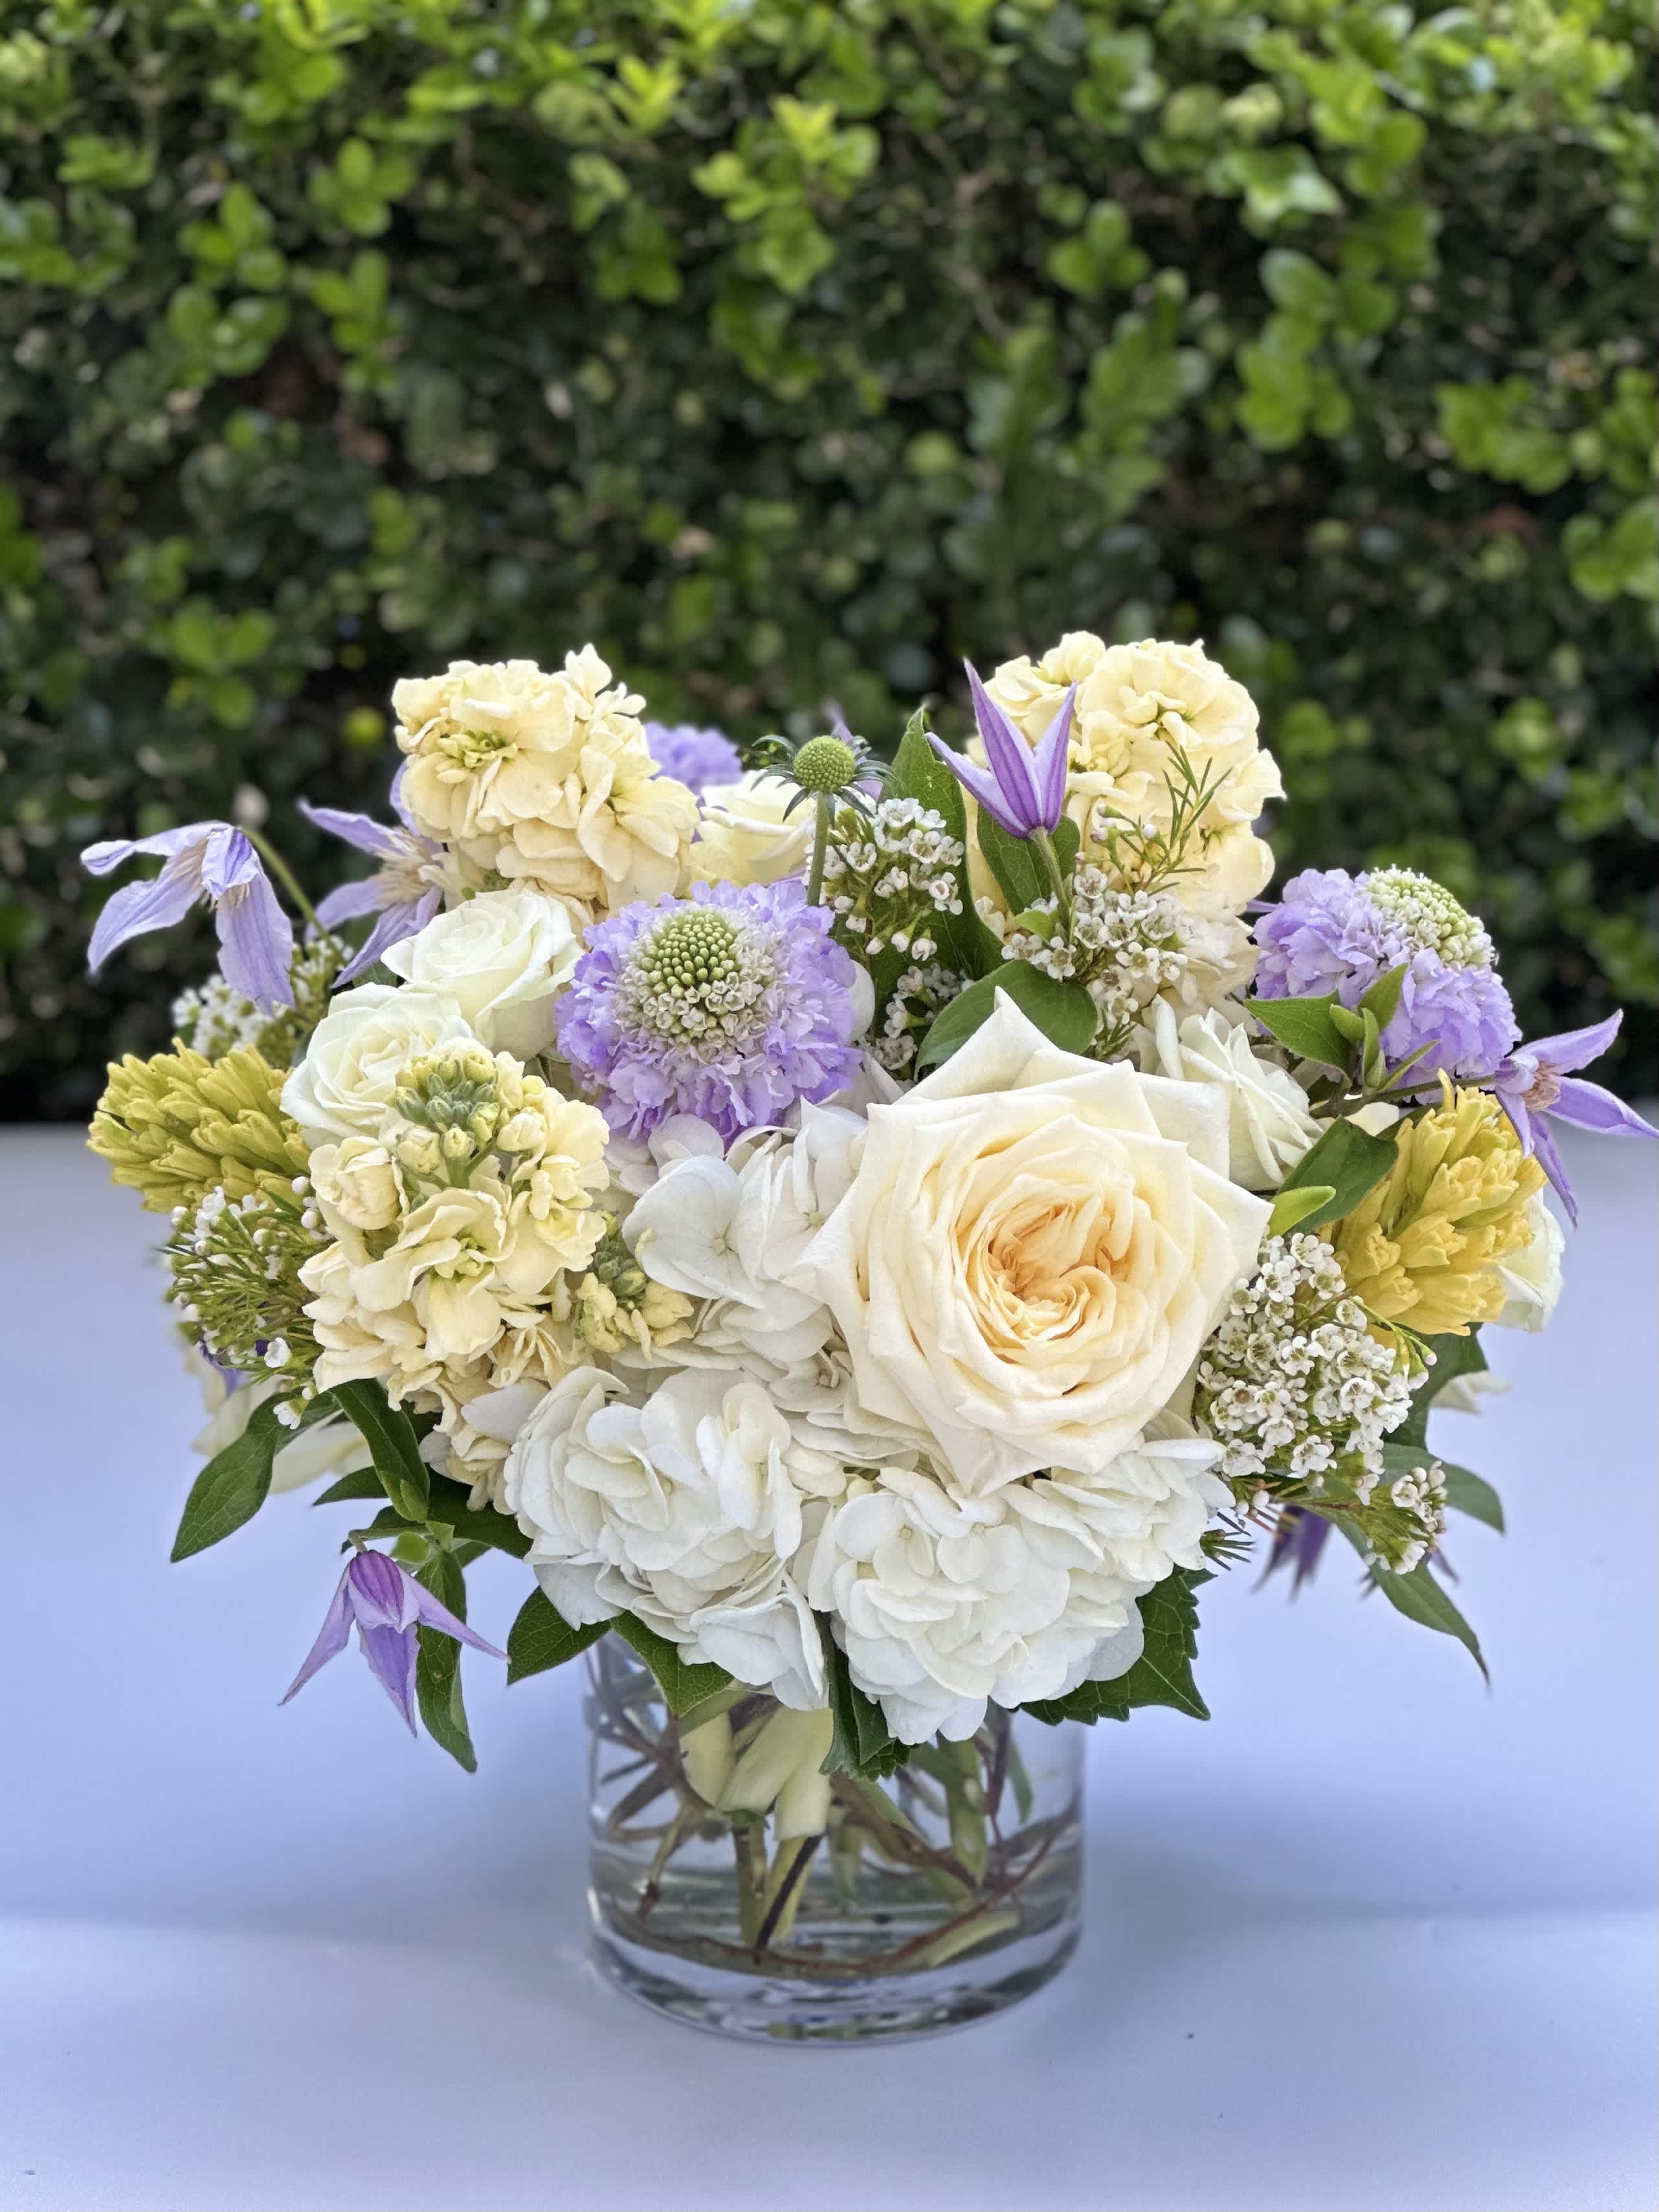 Lavender Serenity - This serene collection of lavender and ivory blooms features ivory roses with delicate accents of clematis, fragrant stock, yellow hyacinth and textural greens.